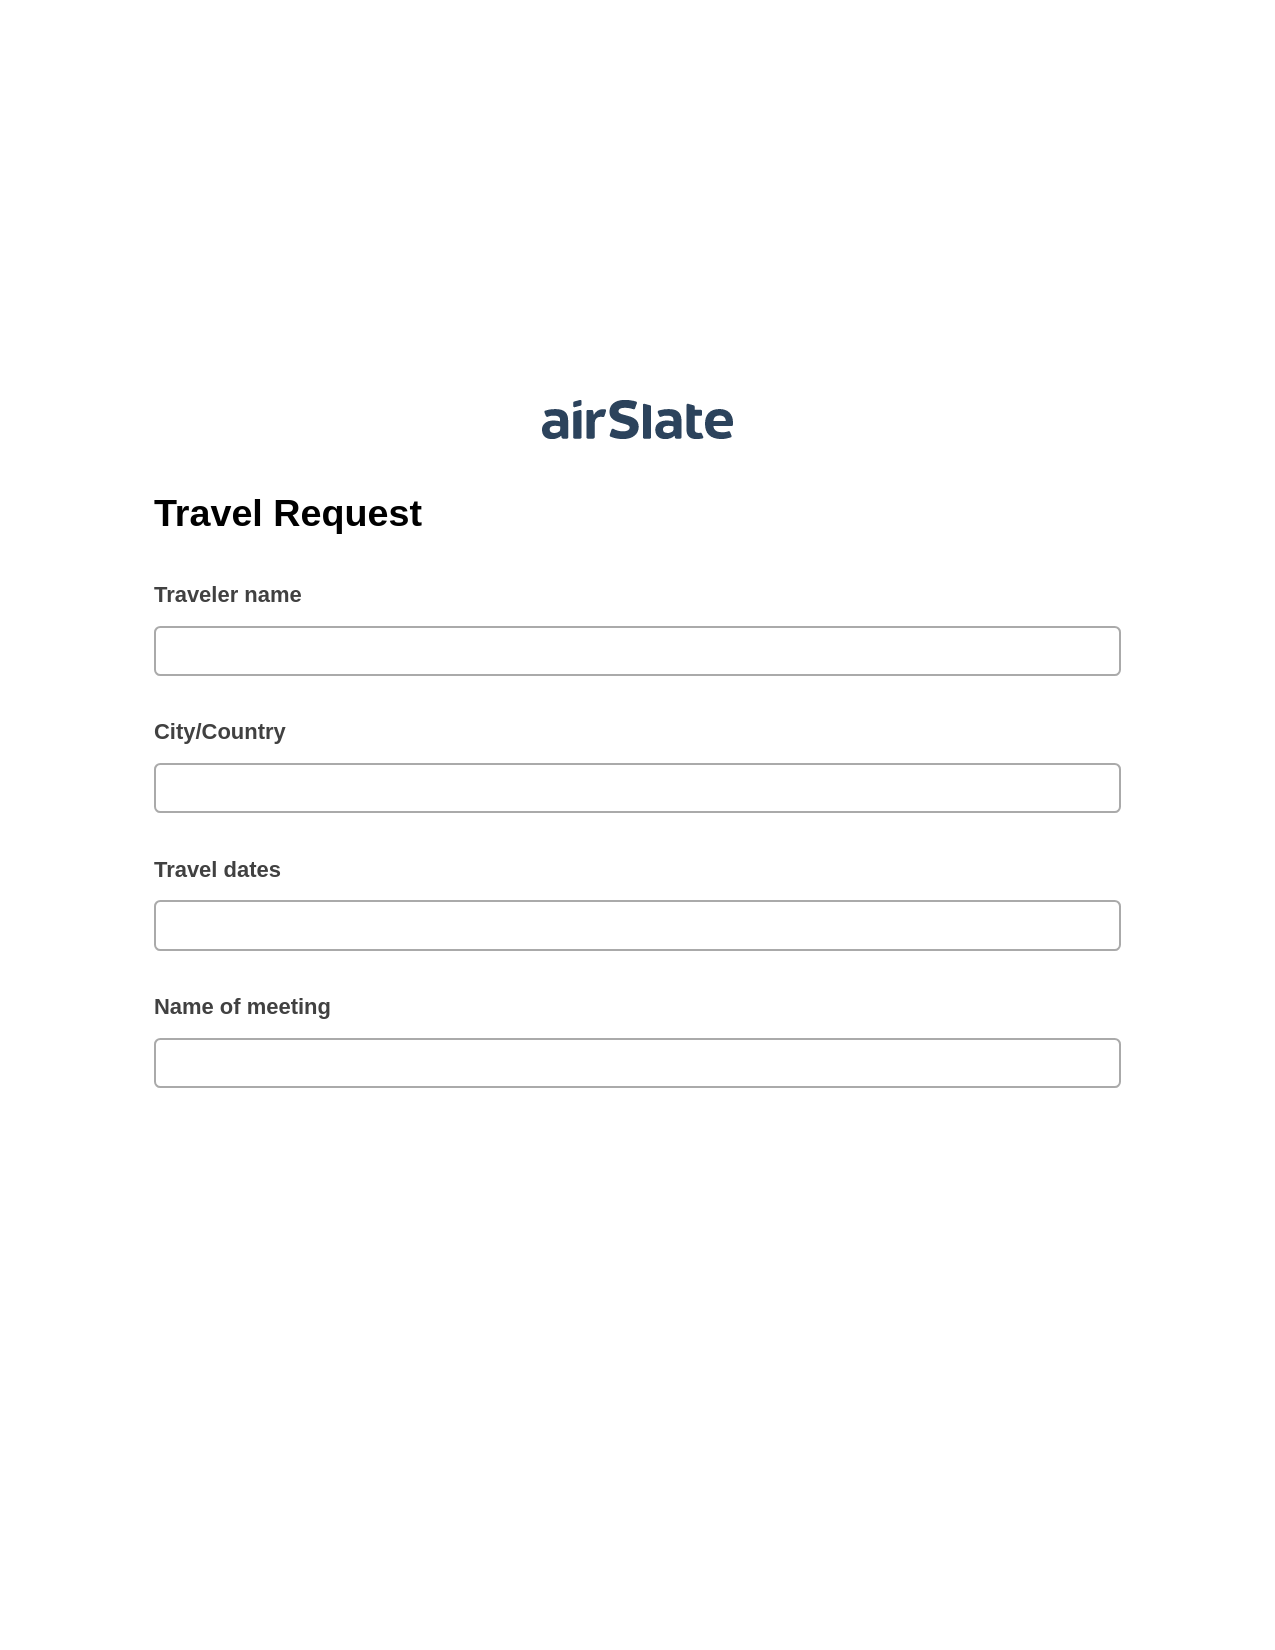 Travel Request Pre-fill from Salesforce Record Bot, Create Salesforce Record Bot, Post-finish Document Bot